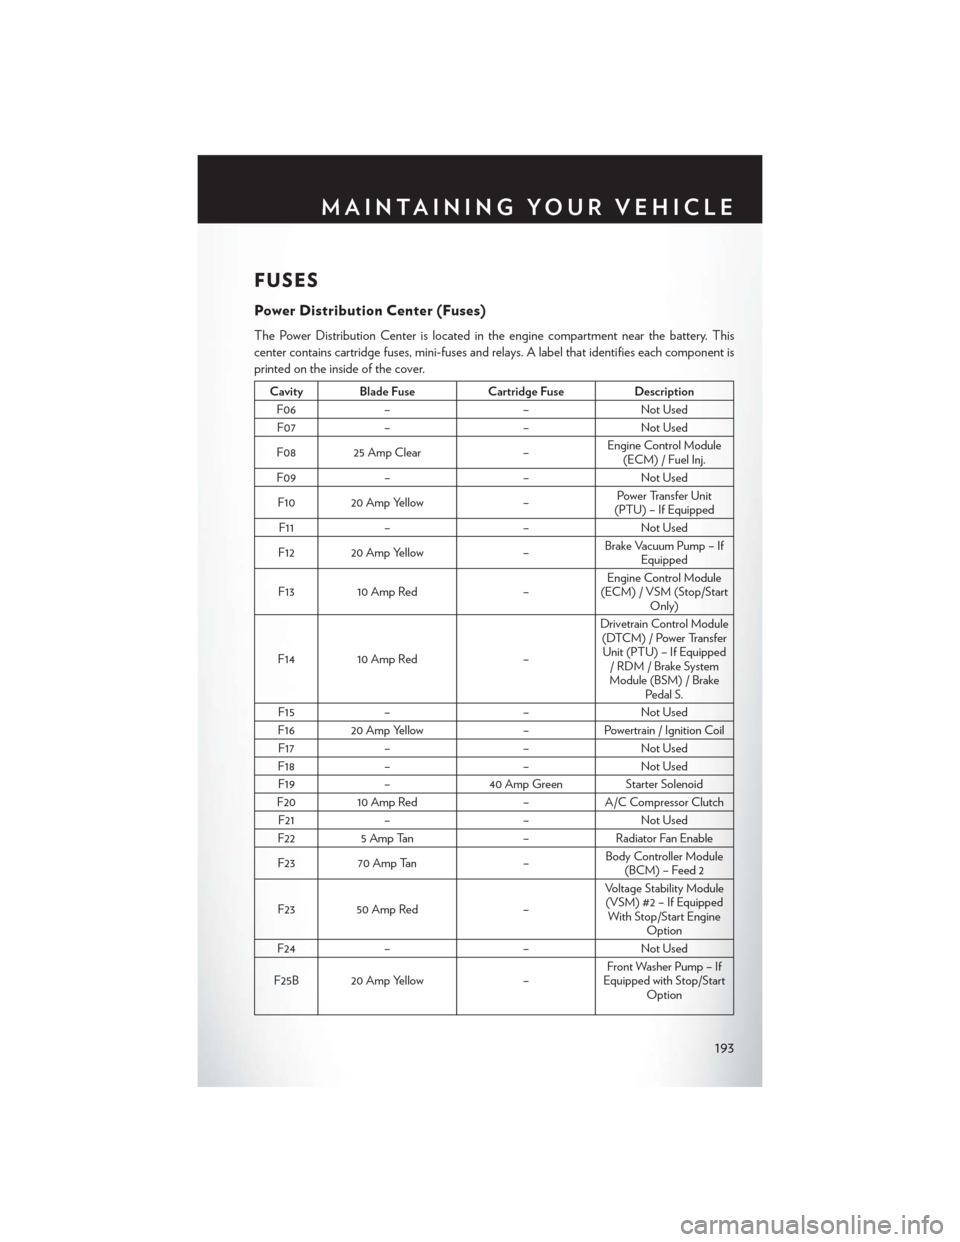 CHRYSLER 200 2015 2.G User Guide FUSES
Power Distribution Center (Fuses)
The Power Distribution Center is located in the engine compartment near the battery. This
center contains cartridge fuses, mini-fuses and relays. A label that i